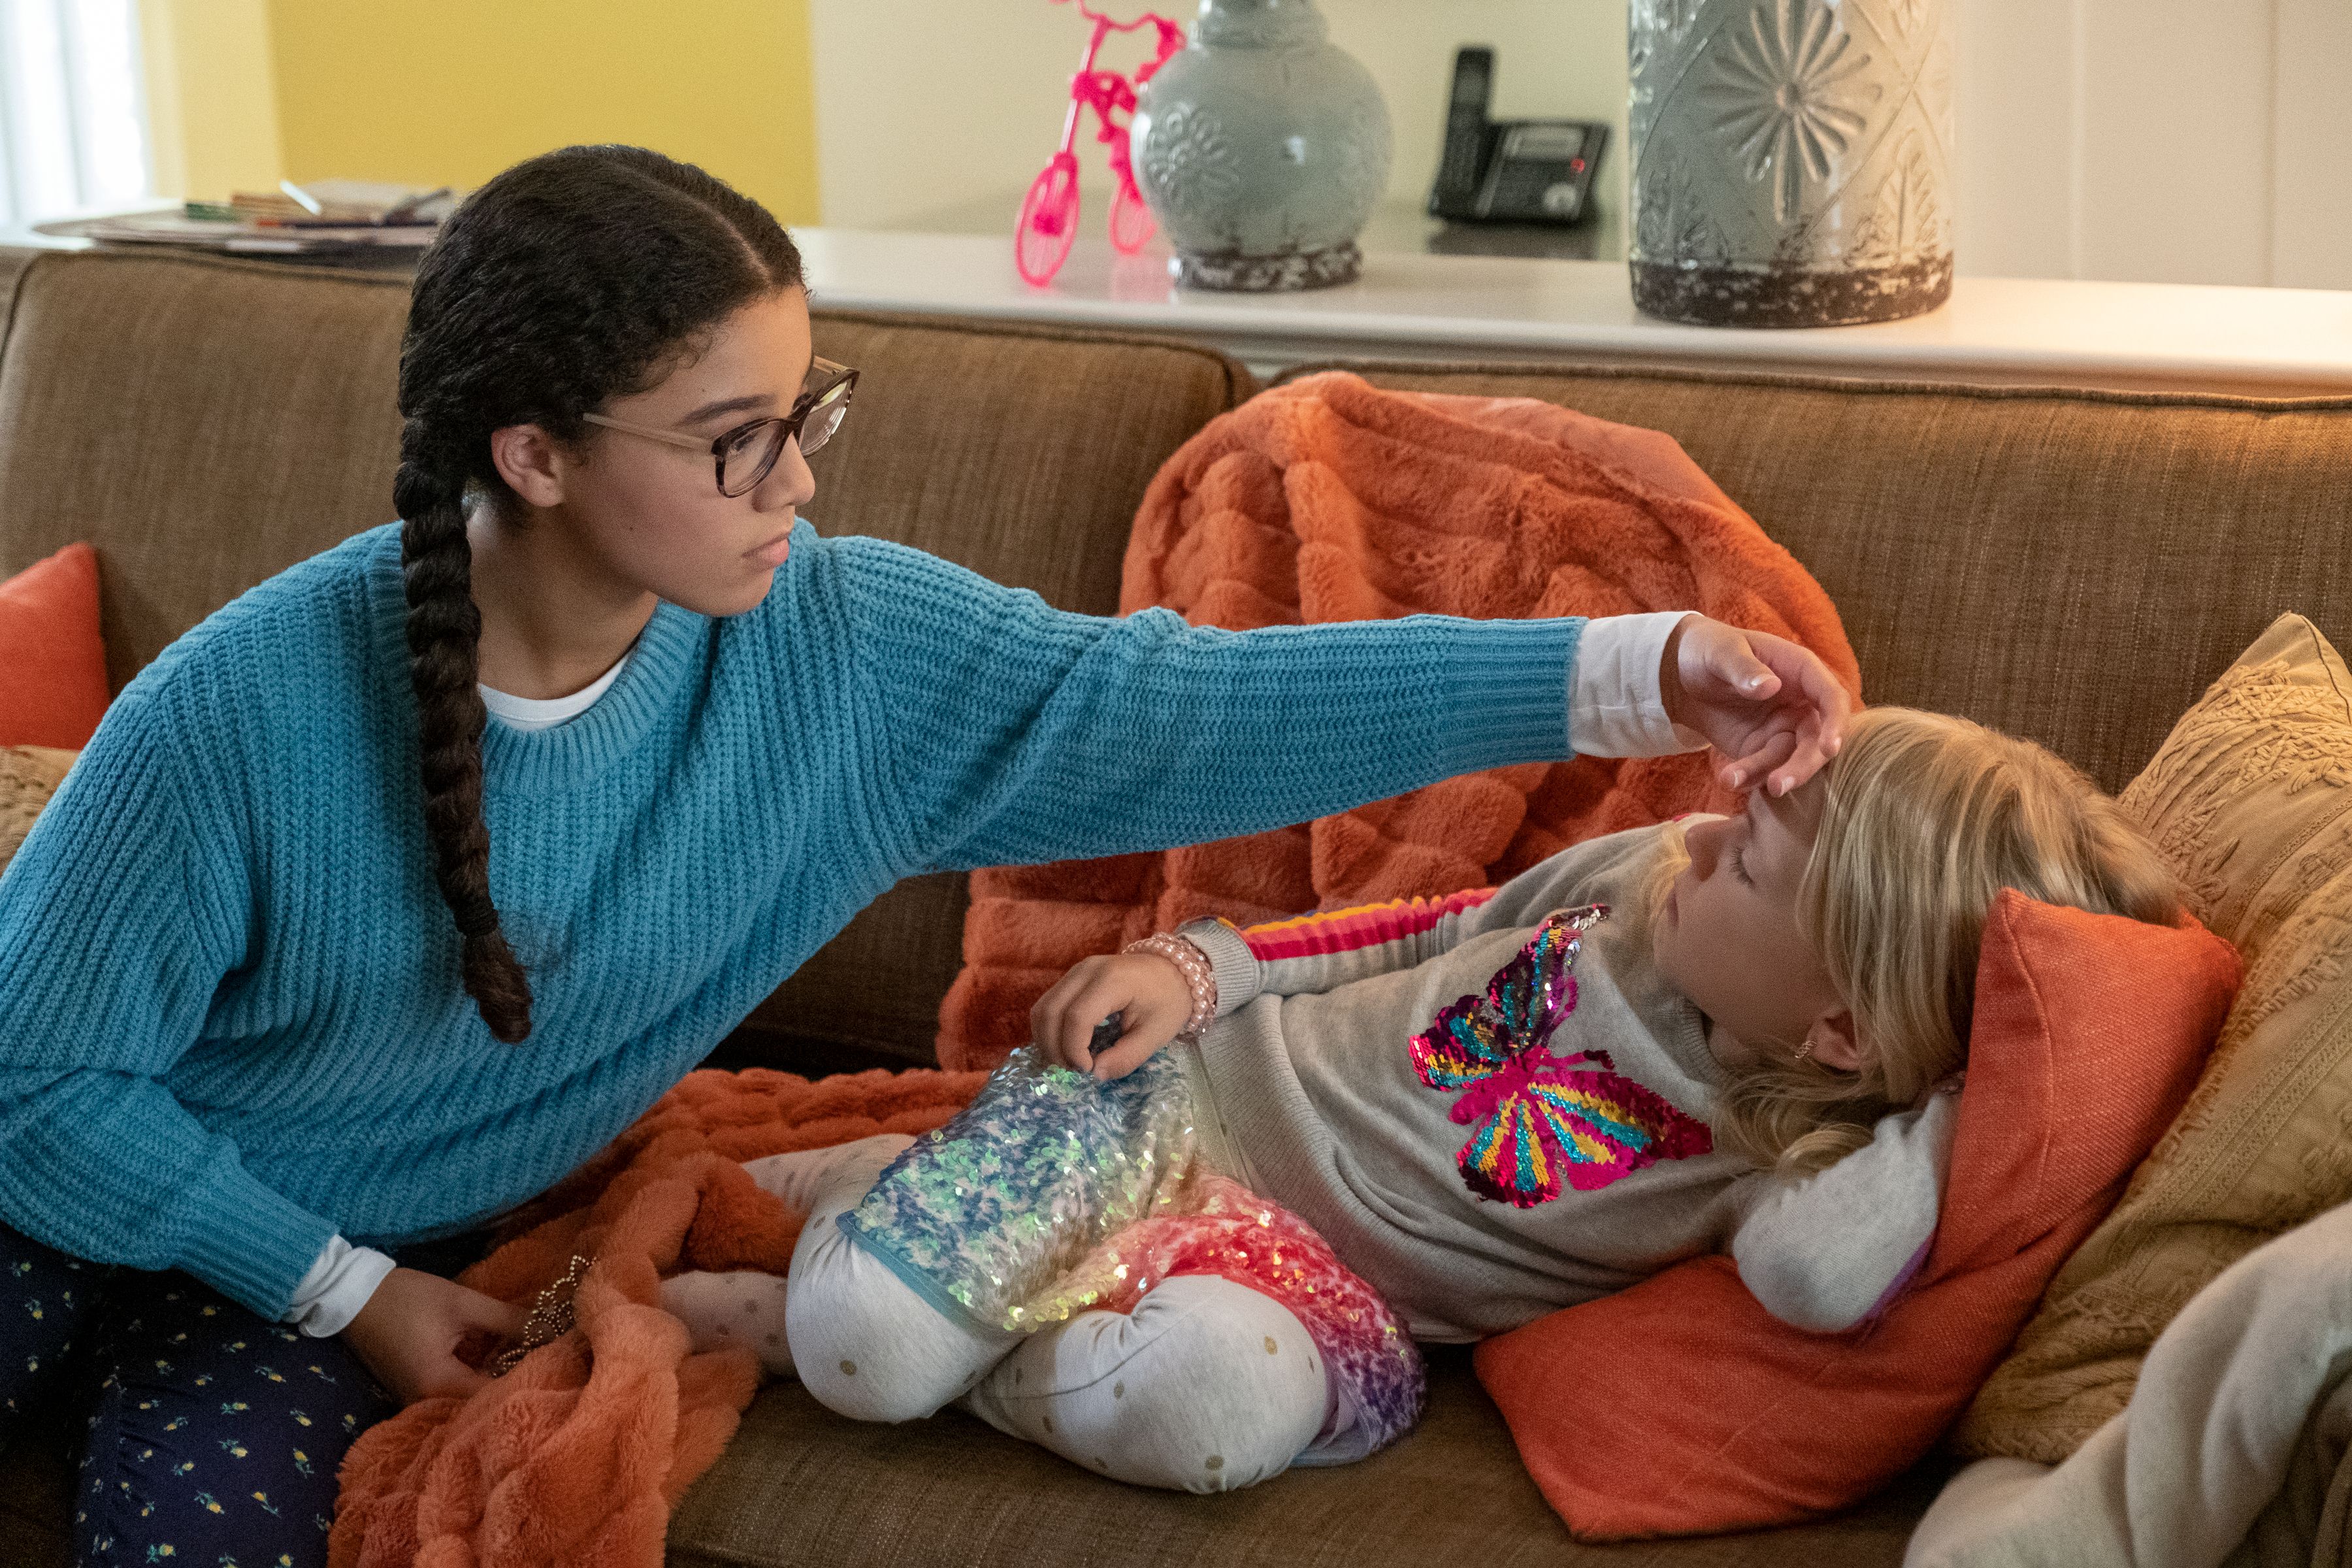 Baby-Sitters Club Recap Episode 4 Mary Anne Saves the Day